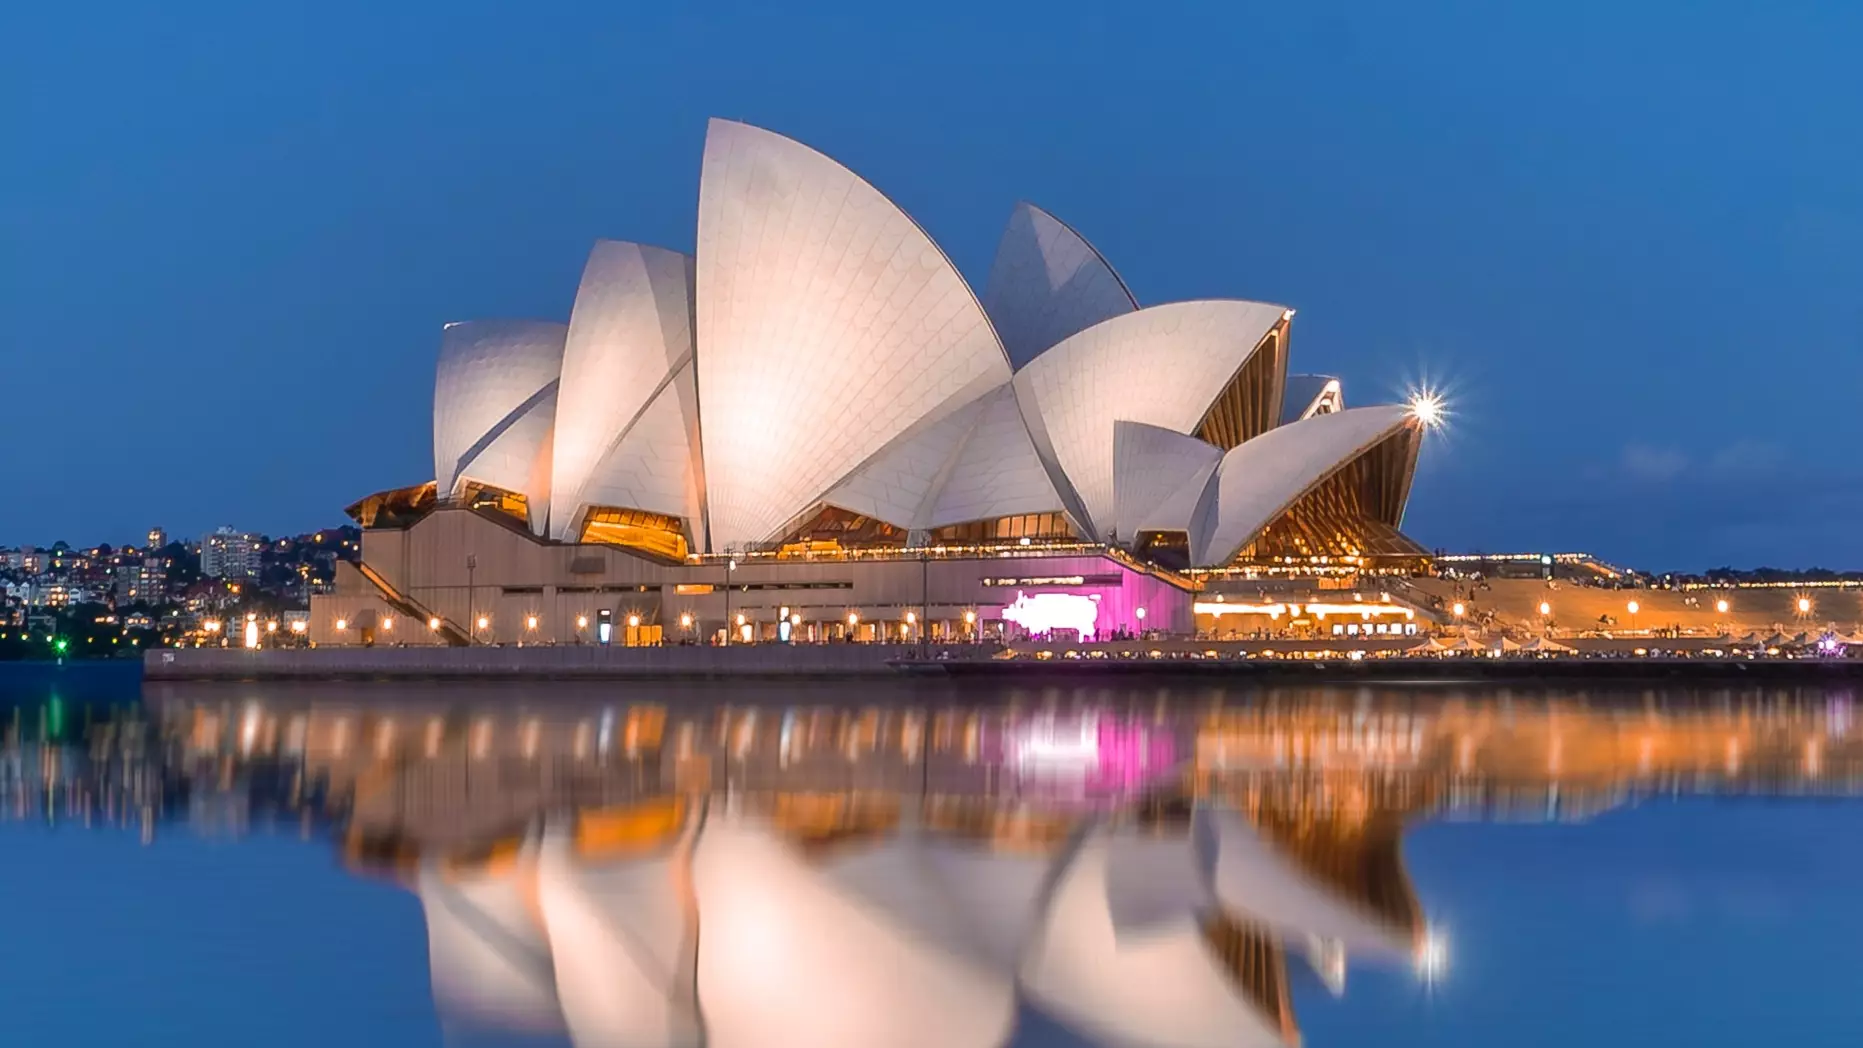 Qantas Is Now Offering Flights From London To Sydney For £205 Return